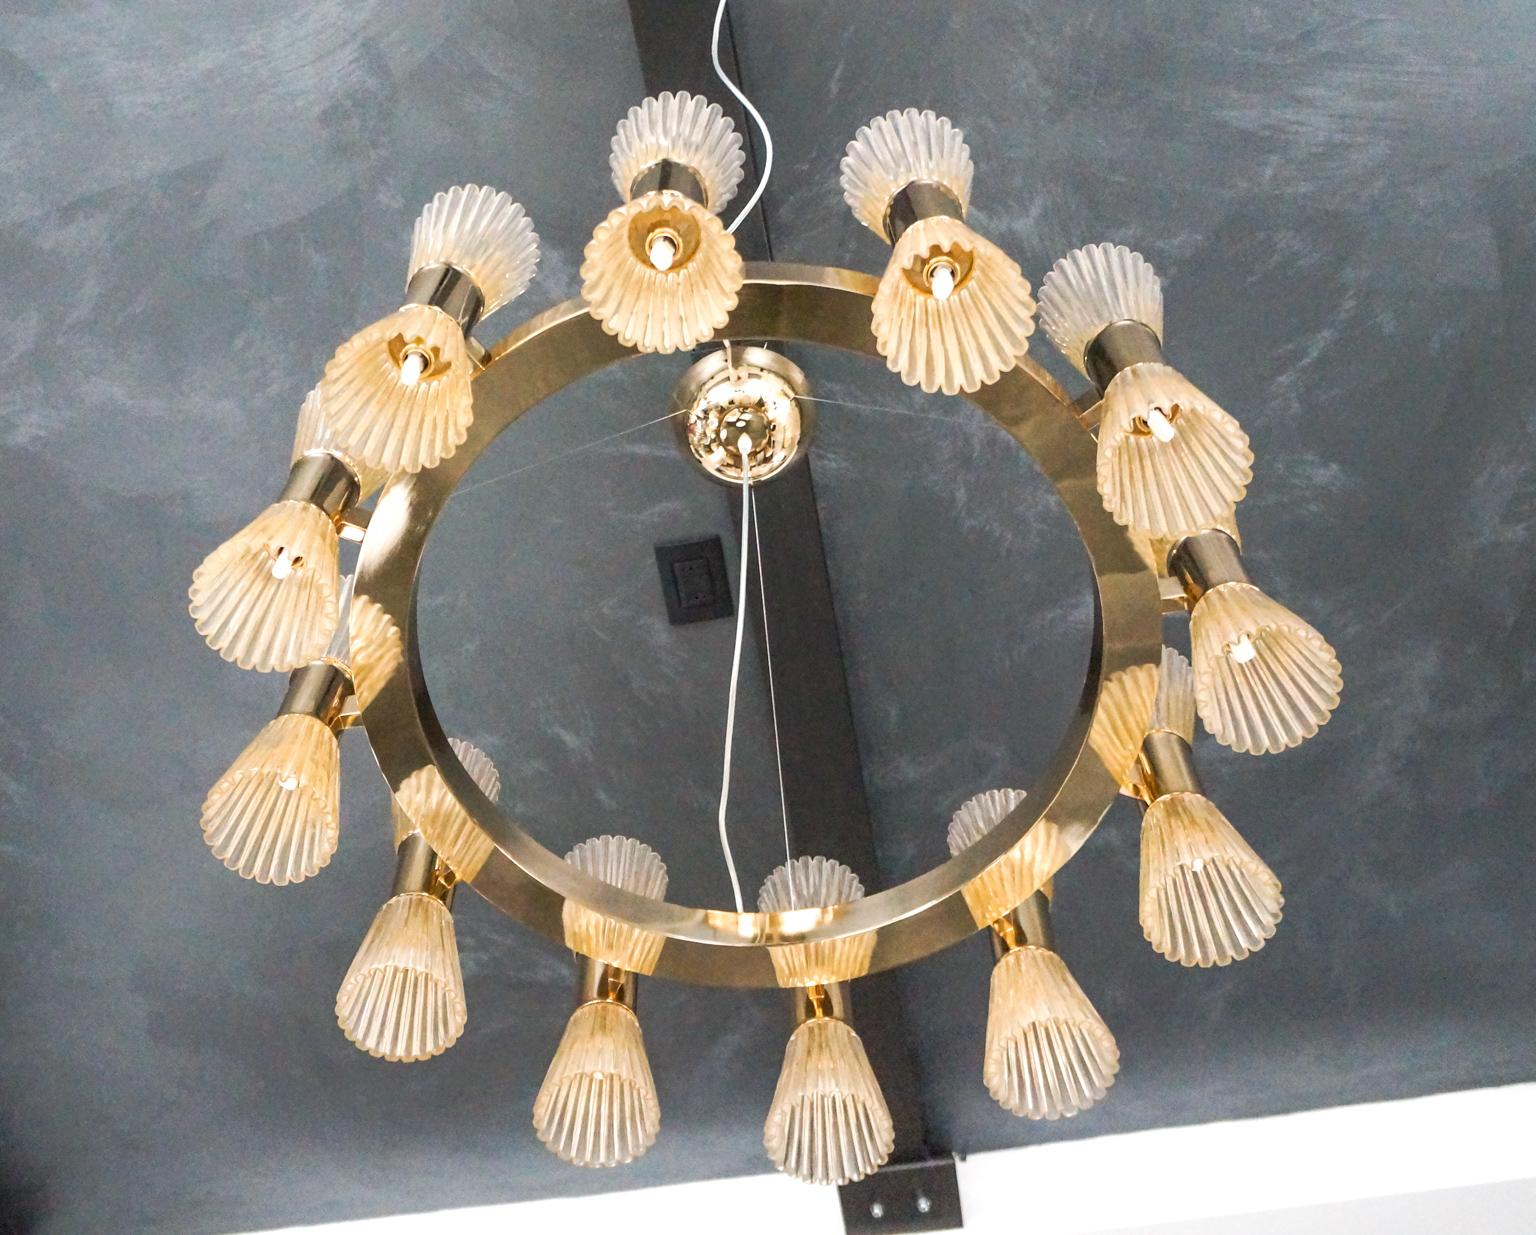 Dona Furnace Mid-Century Modern Gold Murano Glass Chandelier Round, 1998 For Sale 6